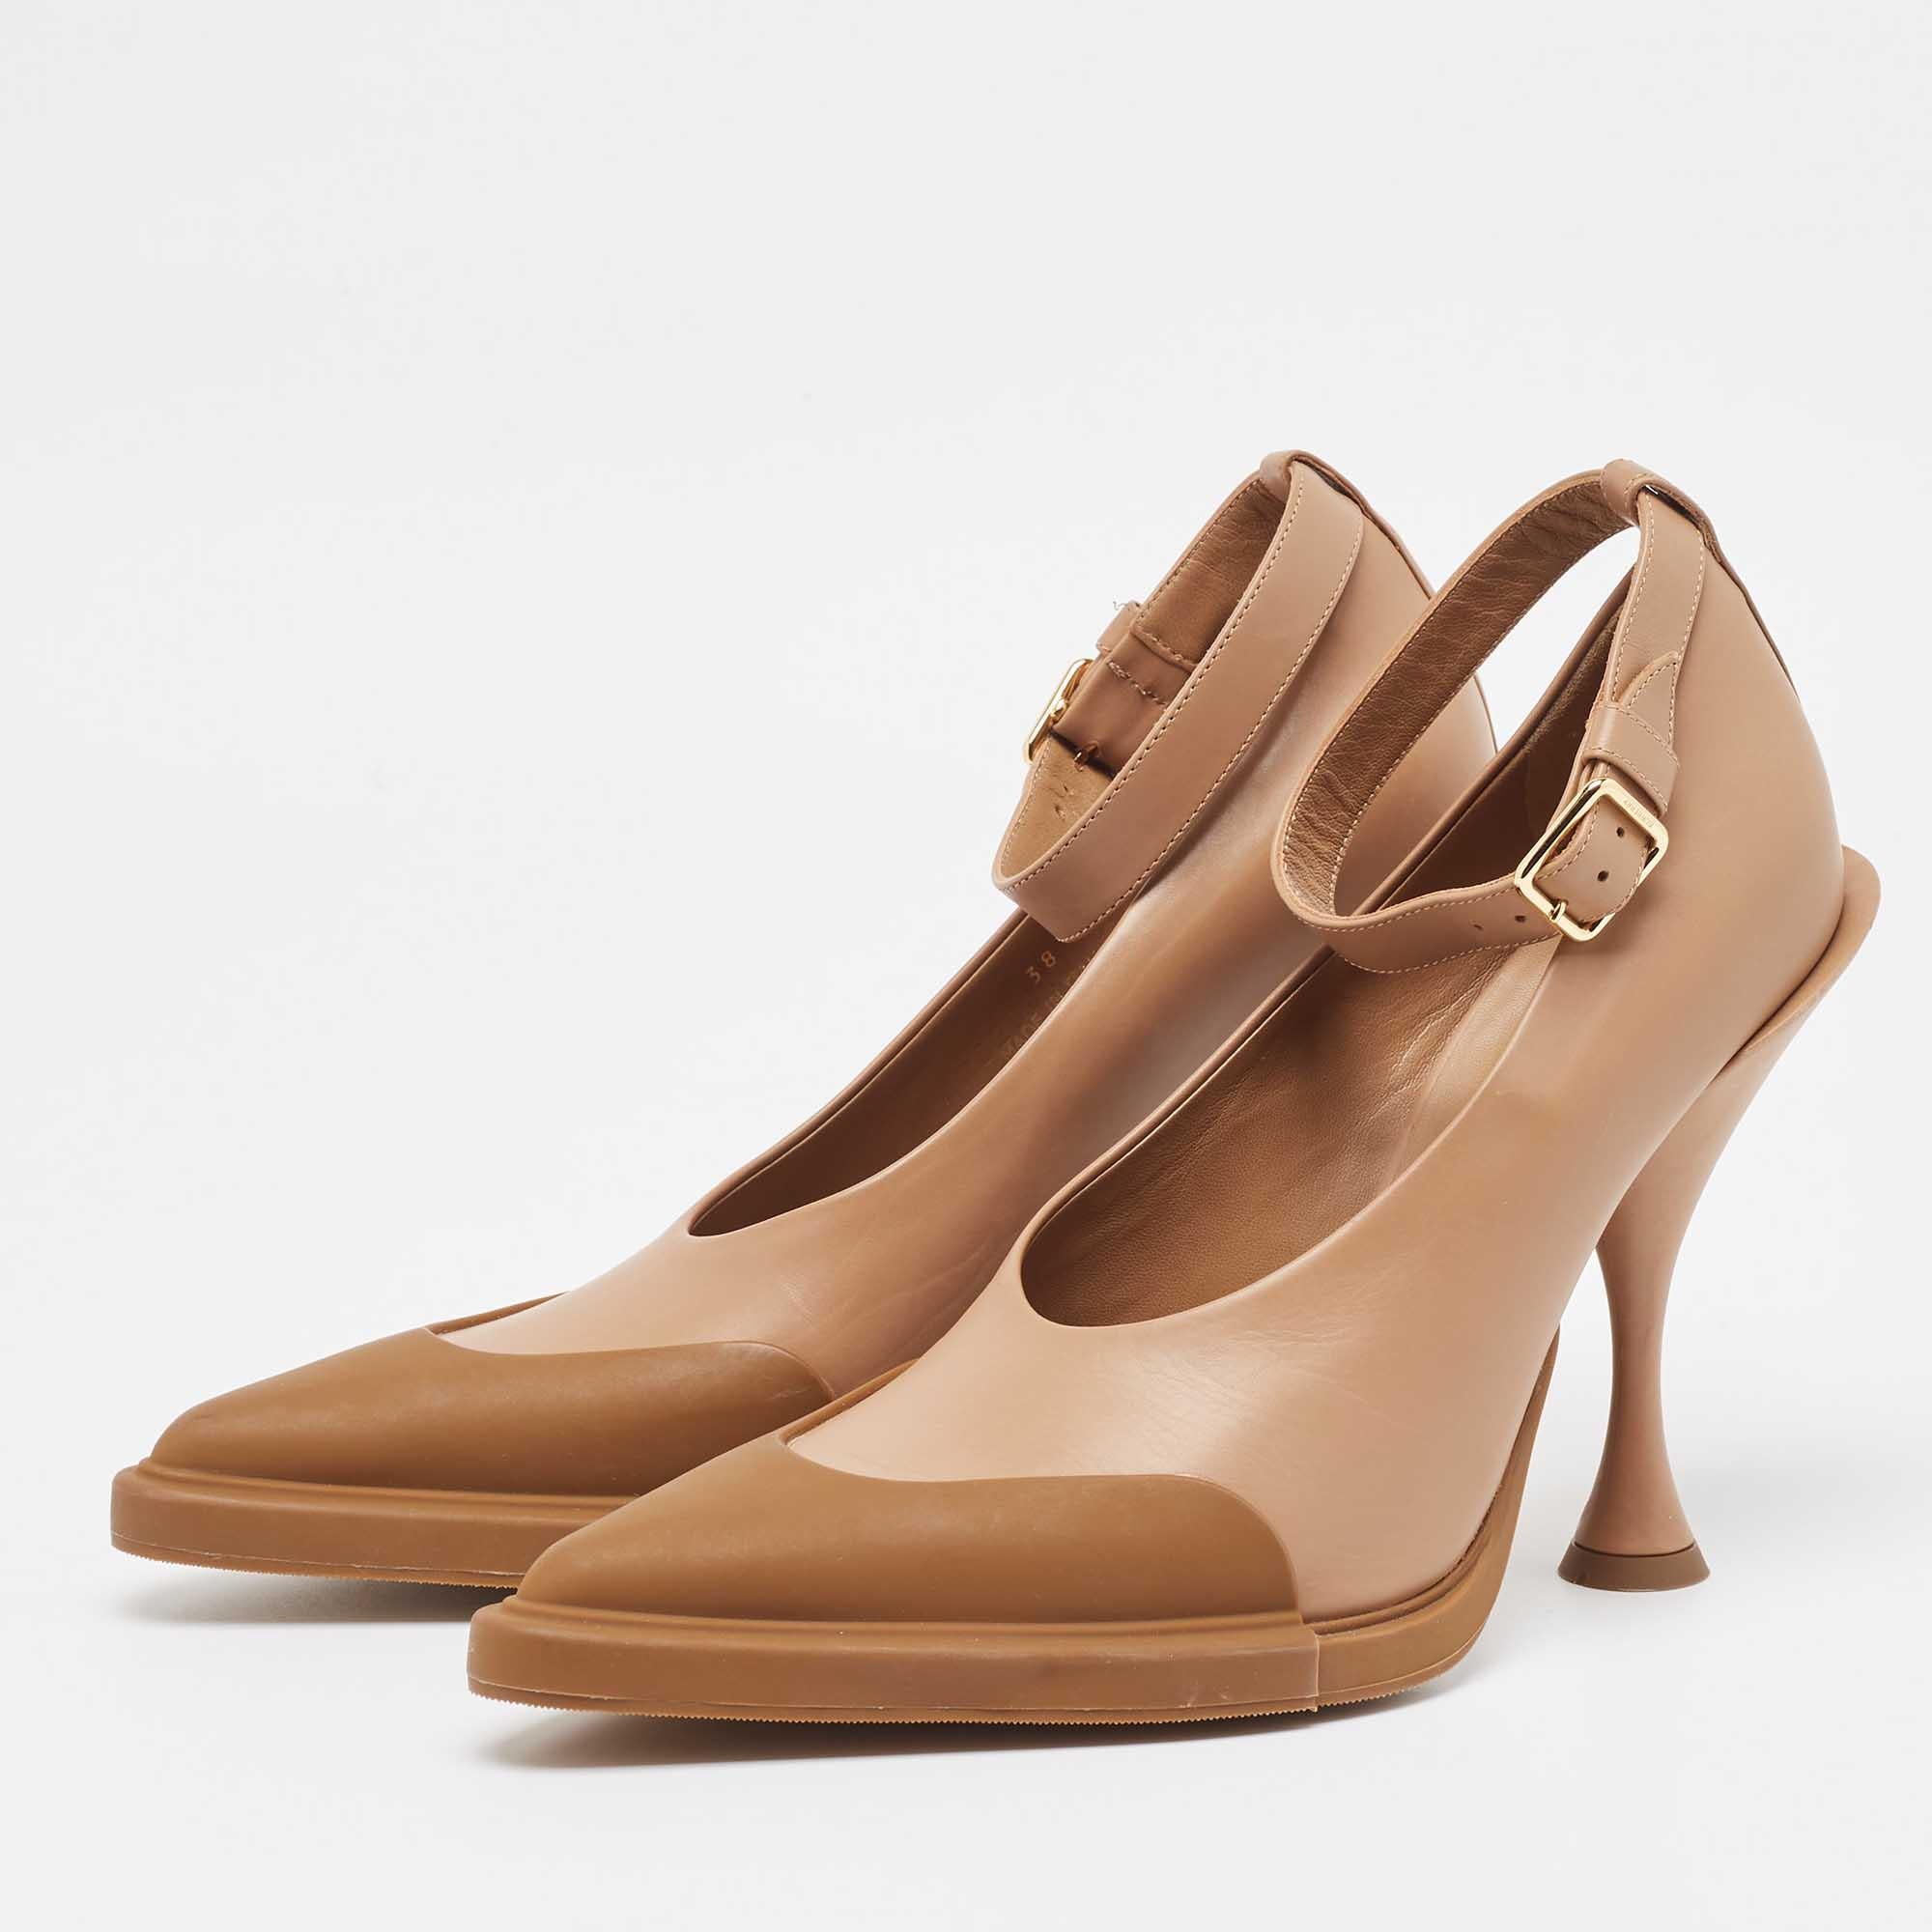 The Evan pumps by Burberry define the label’s elegant charm and unique aesthetics. They are skillfully crafted from leather and rubber in a brown shade and characterized by luxe cuts, sculptural details, and a durable build.

